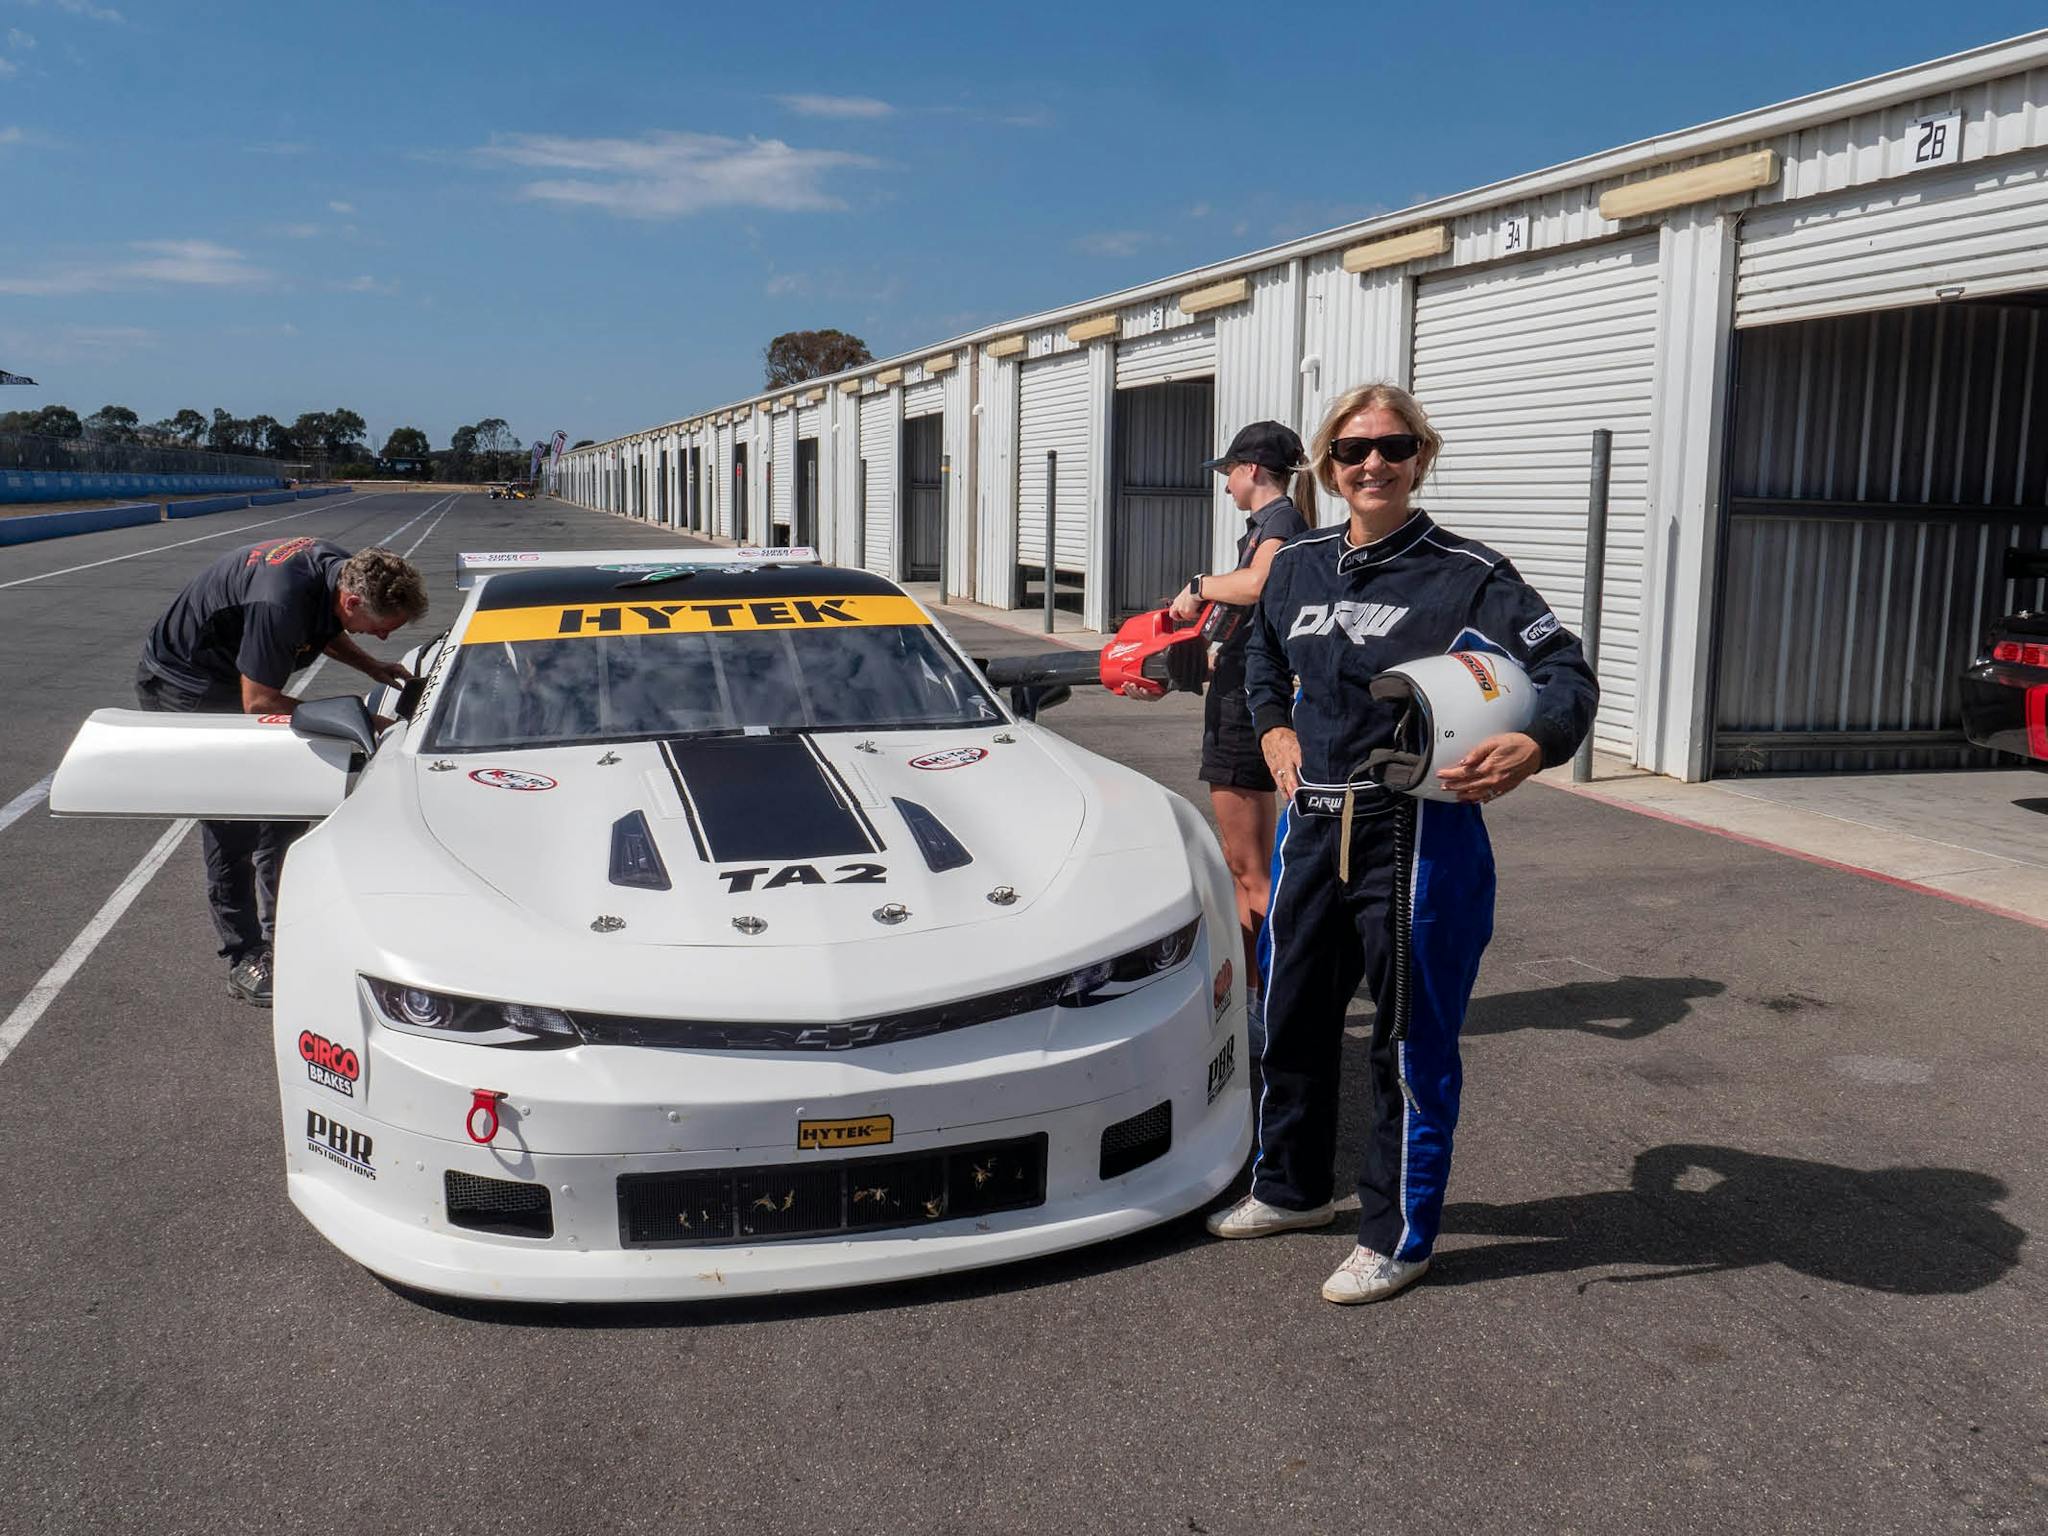 Lady in a racing suit standing next to a TA2 white muscle car